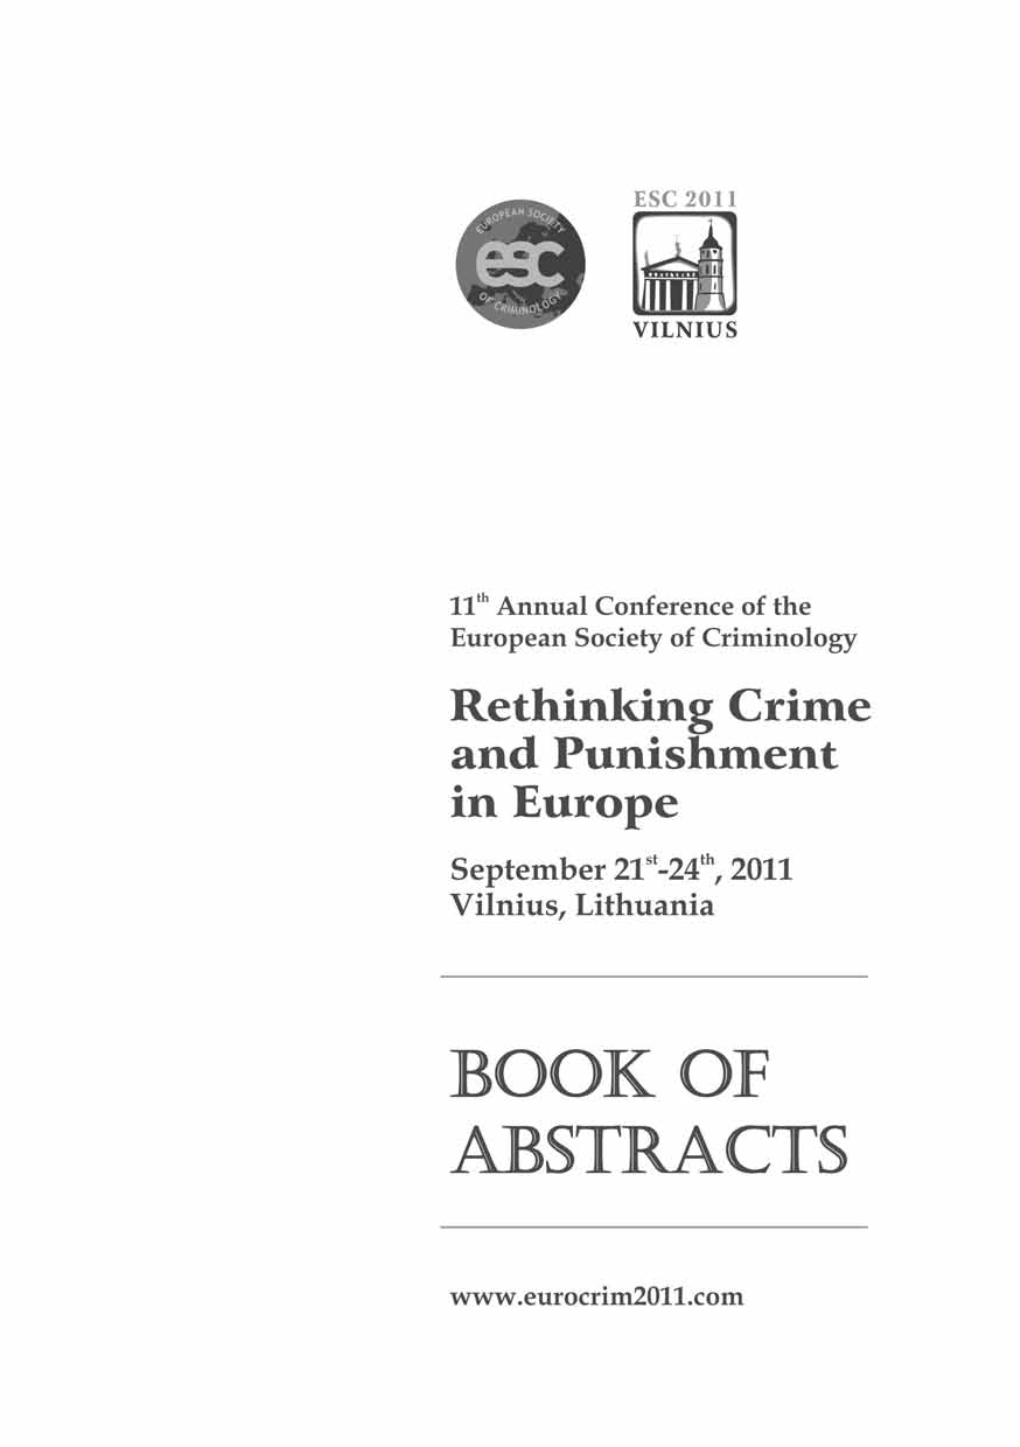 Eurocrim 2011 Book of Abstracts